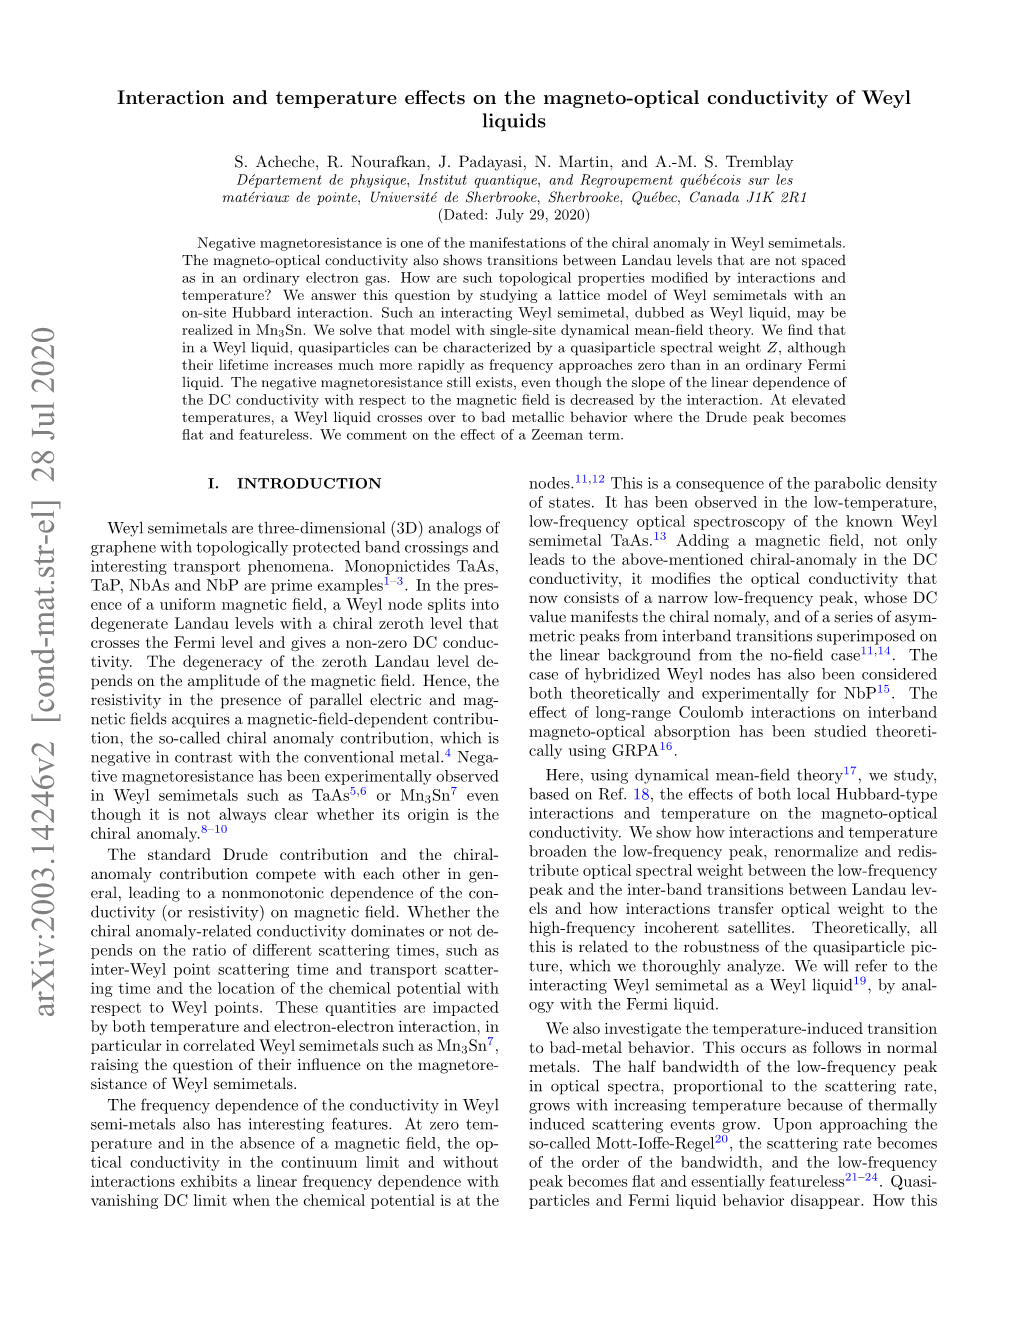 Interaction and Temperature Effects on the Magneto-Optical Conductivity Of